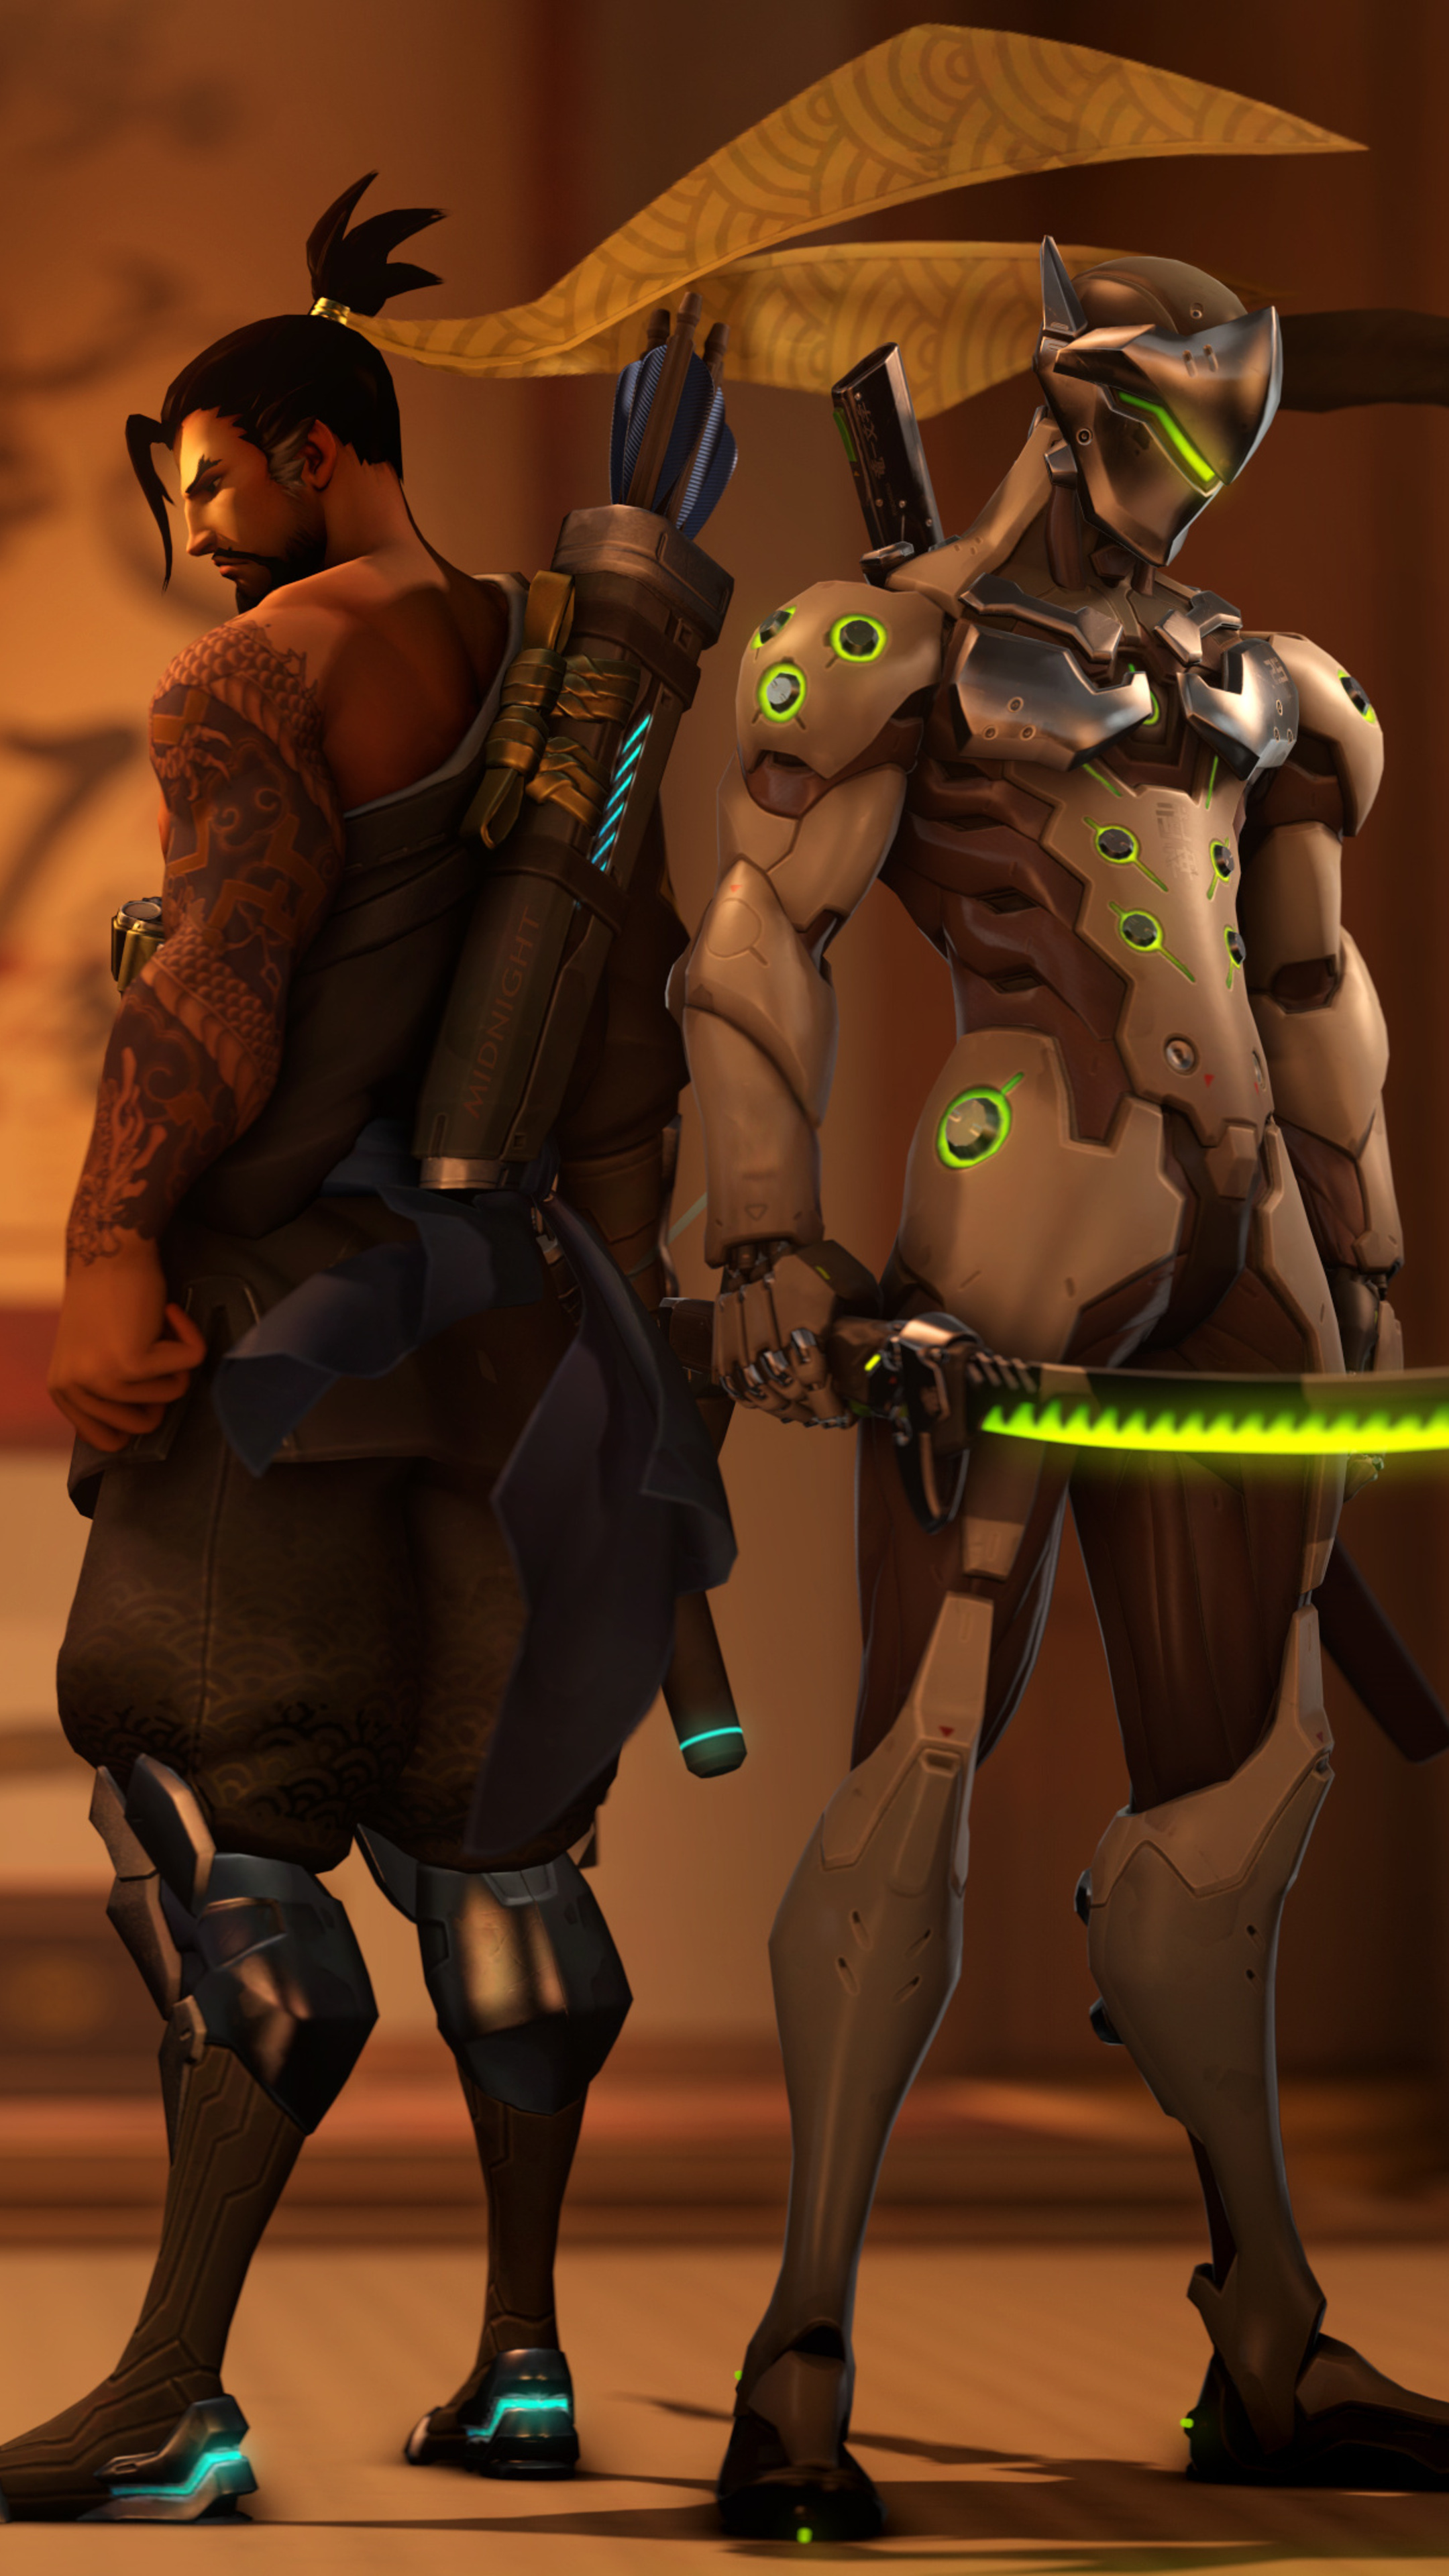 Genji and Hanzo, Dynamic duo, Sony Xperia wallpapers, High-quality images, 2160x3840 4K Phone